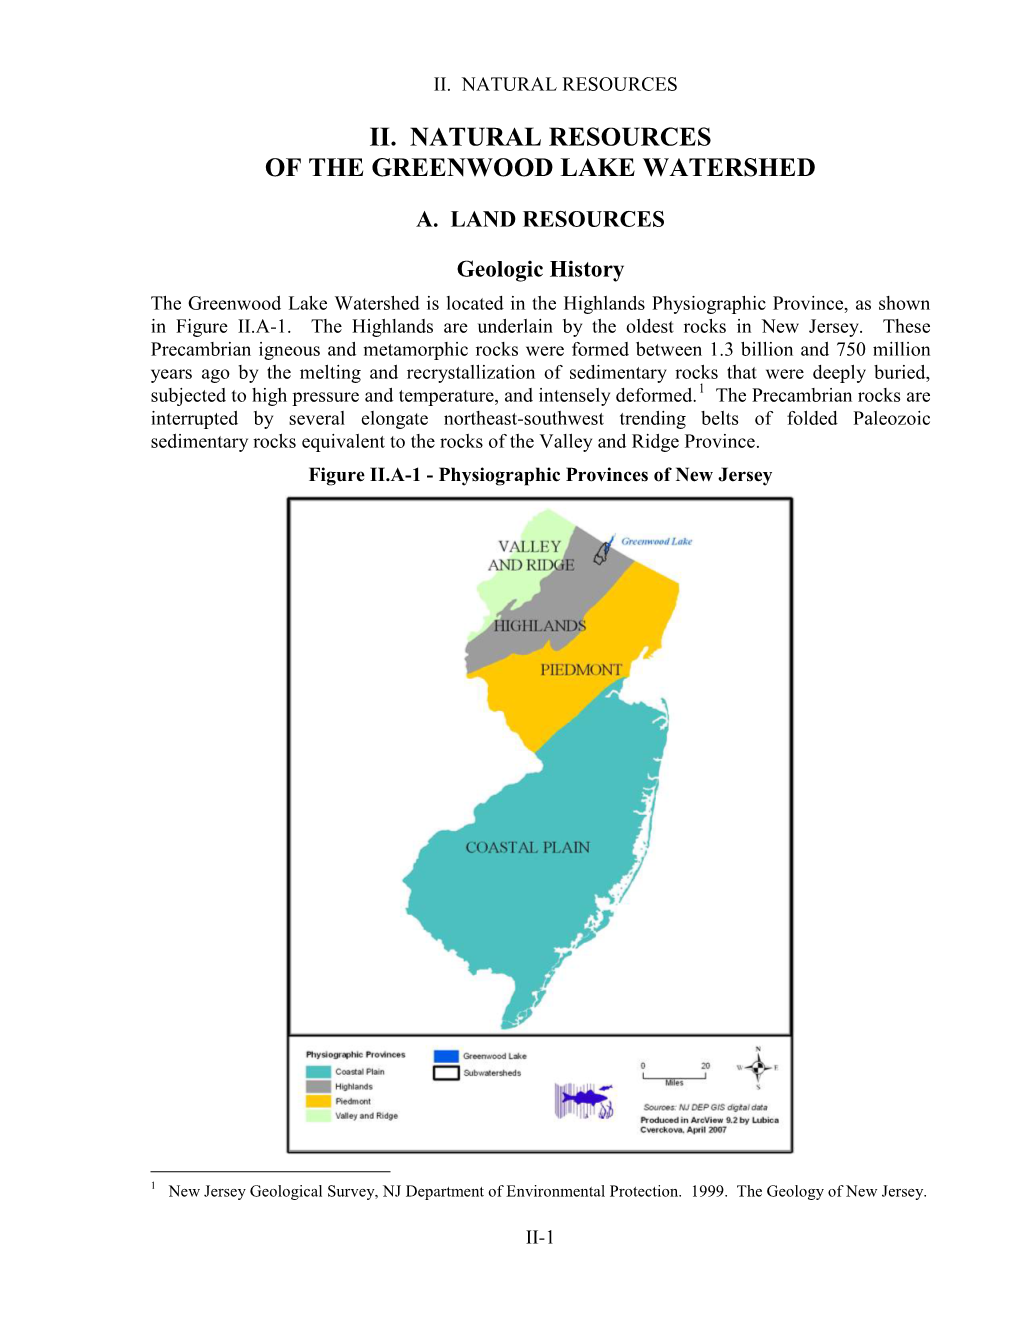 Ii. Natural Resources of the Greenwood Lake Watershed